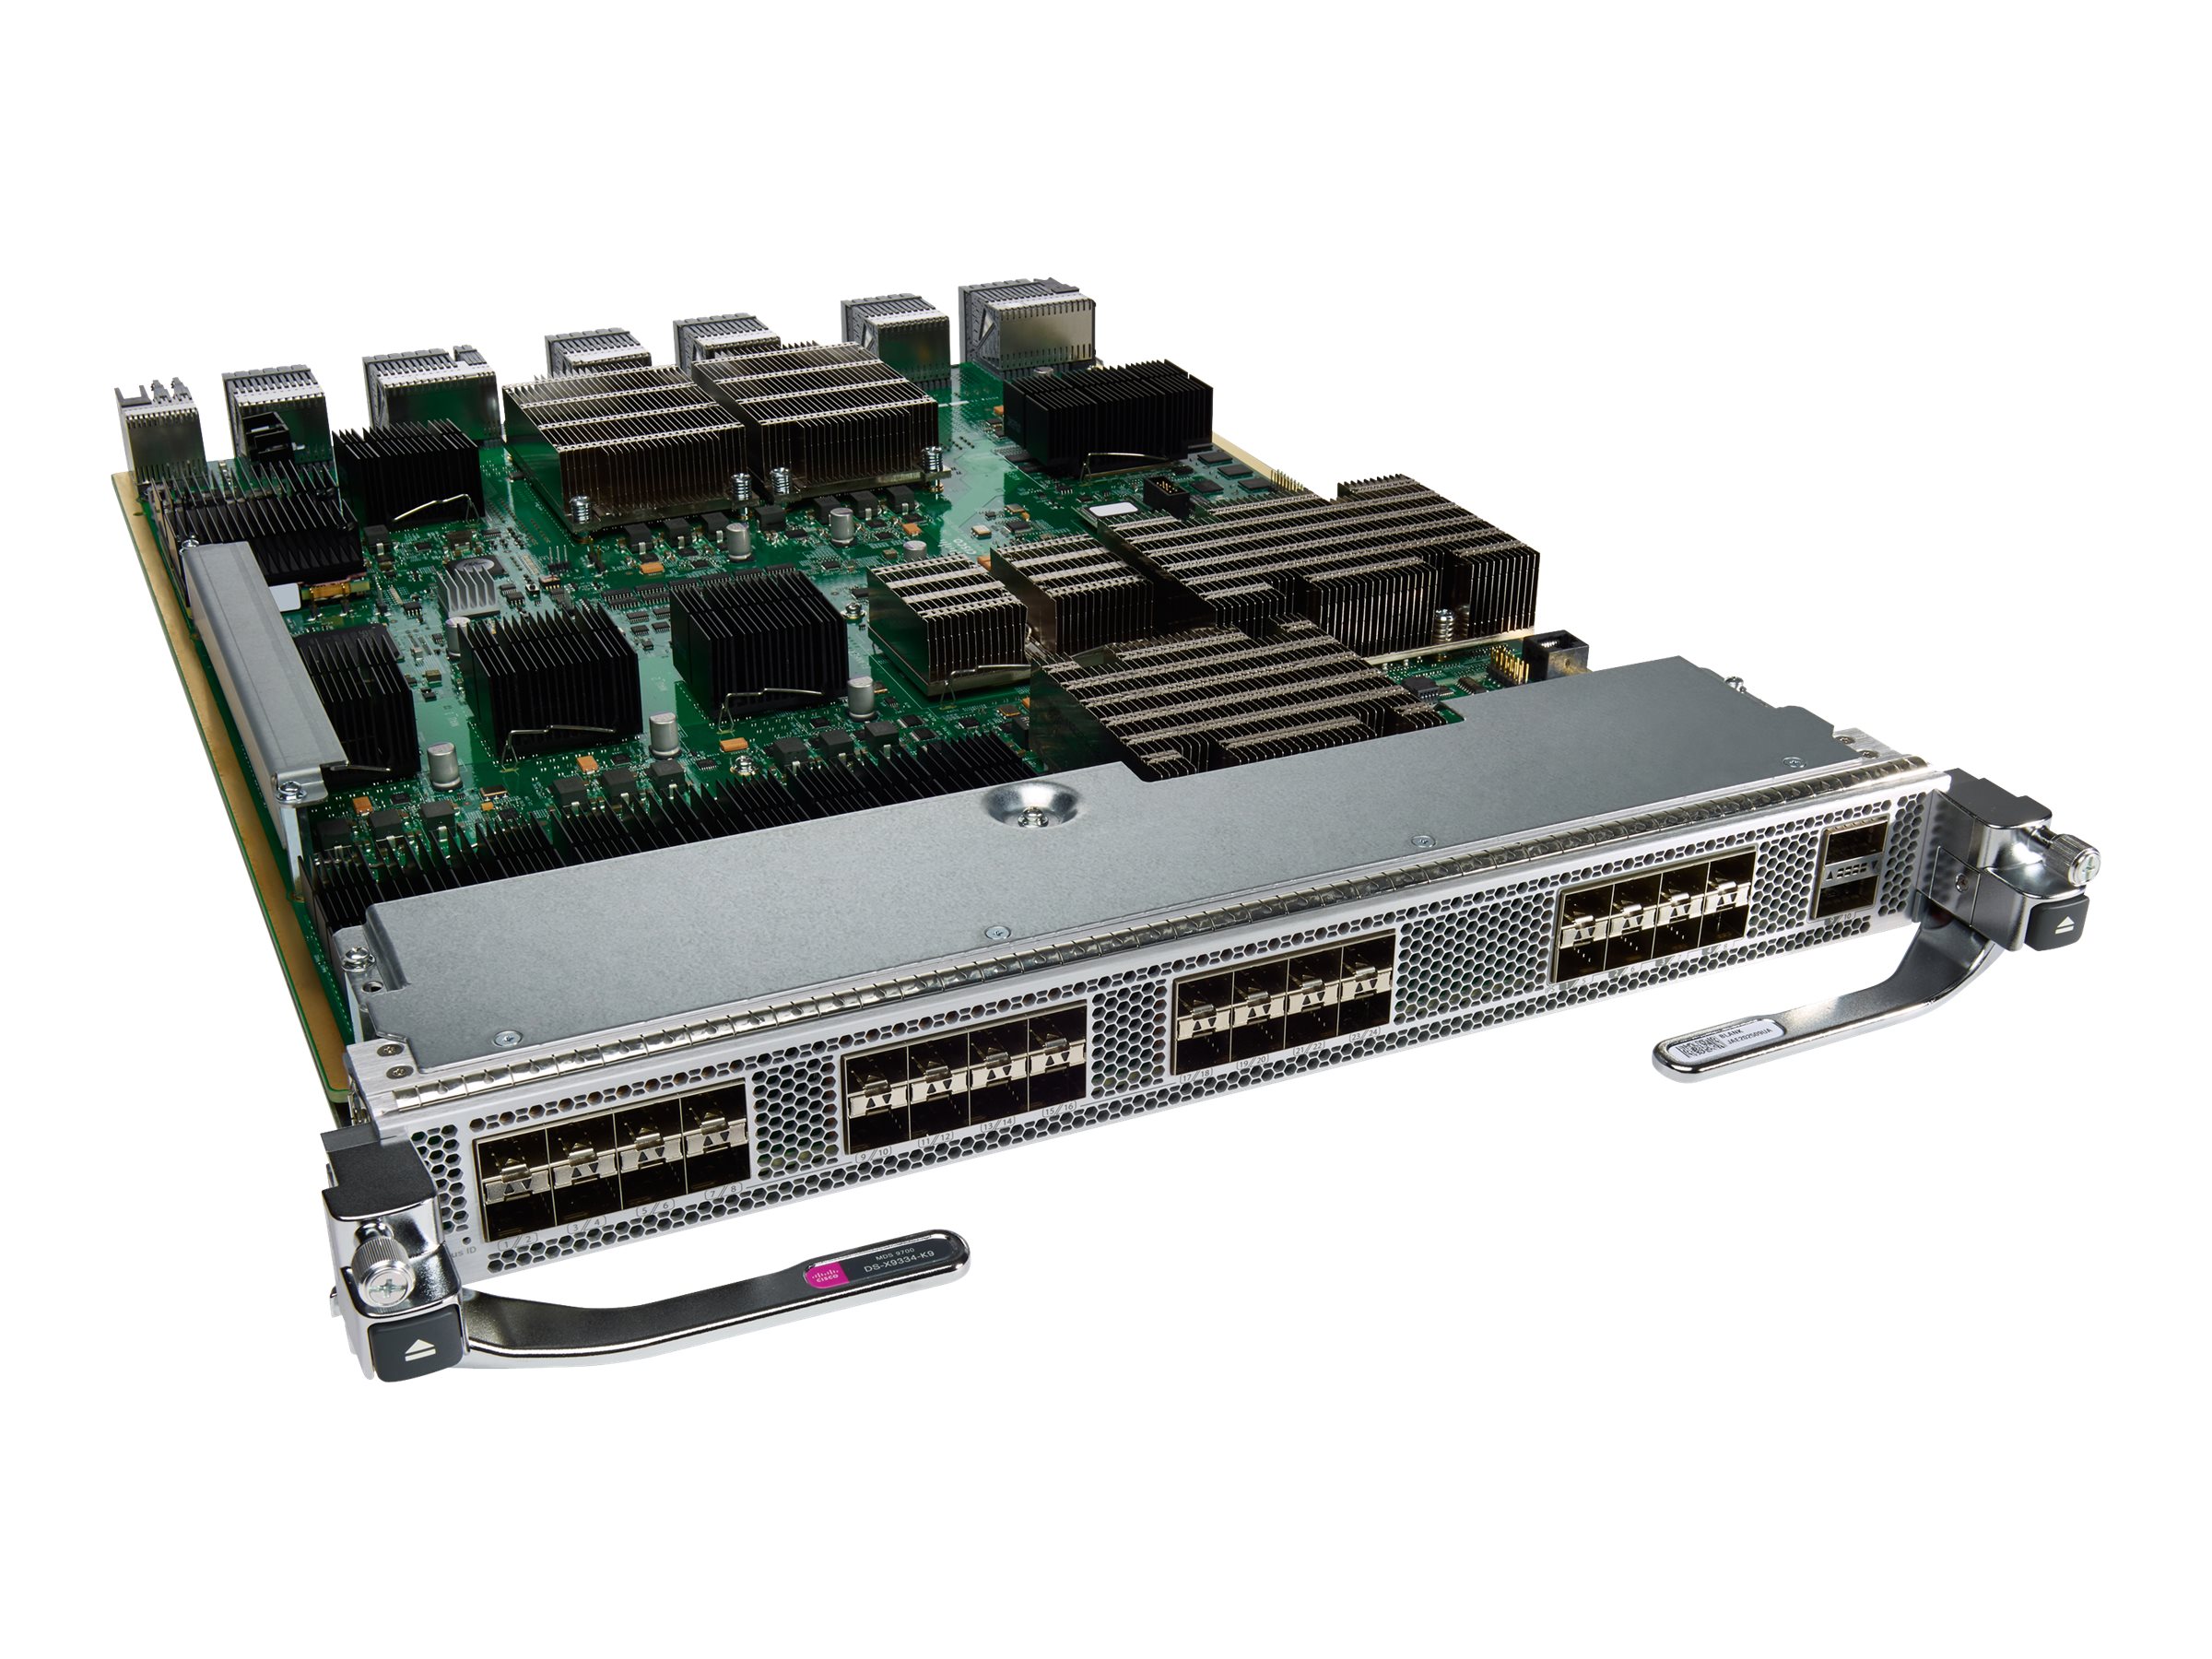 Cisco MDS 9000 Family SAN Extension Module - Erweiterungsmodul - 16Gb Fibre Channel x 24 + 10Gb FCoE x 8 - fr MDS 9706, 9710, 9